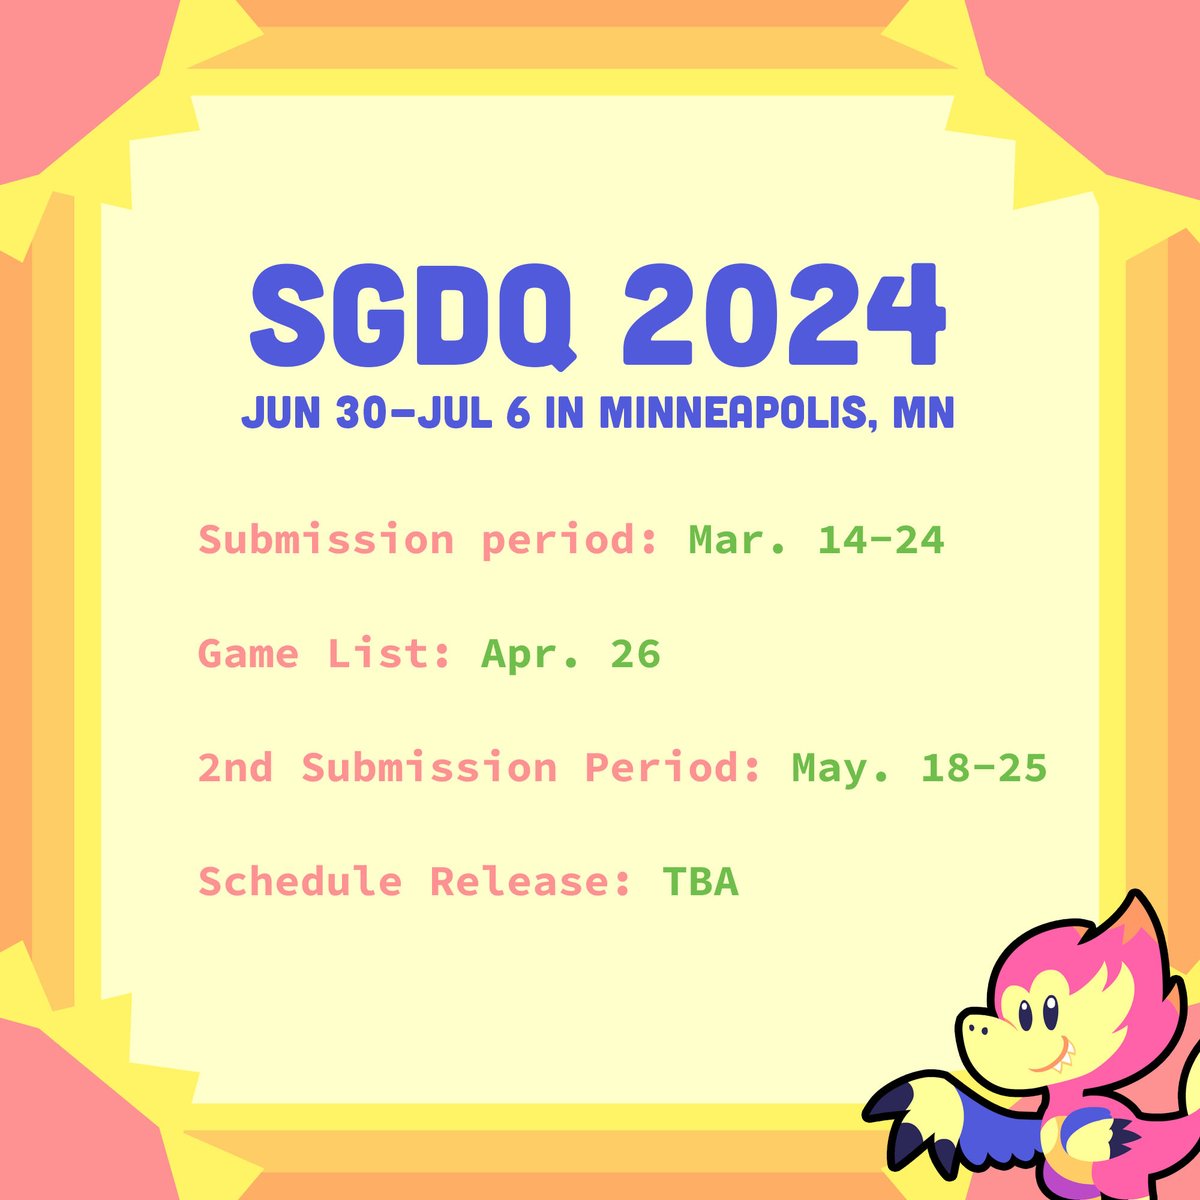 Today's the LAST day to submit your runs for #SGDQ2024!! Submit runs here: gamesdonequick.com/profile Stay tuned for the Games List on April 26 and the Second Submission Period starting on May 18!